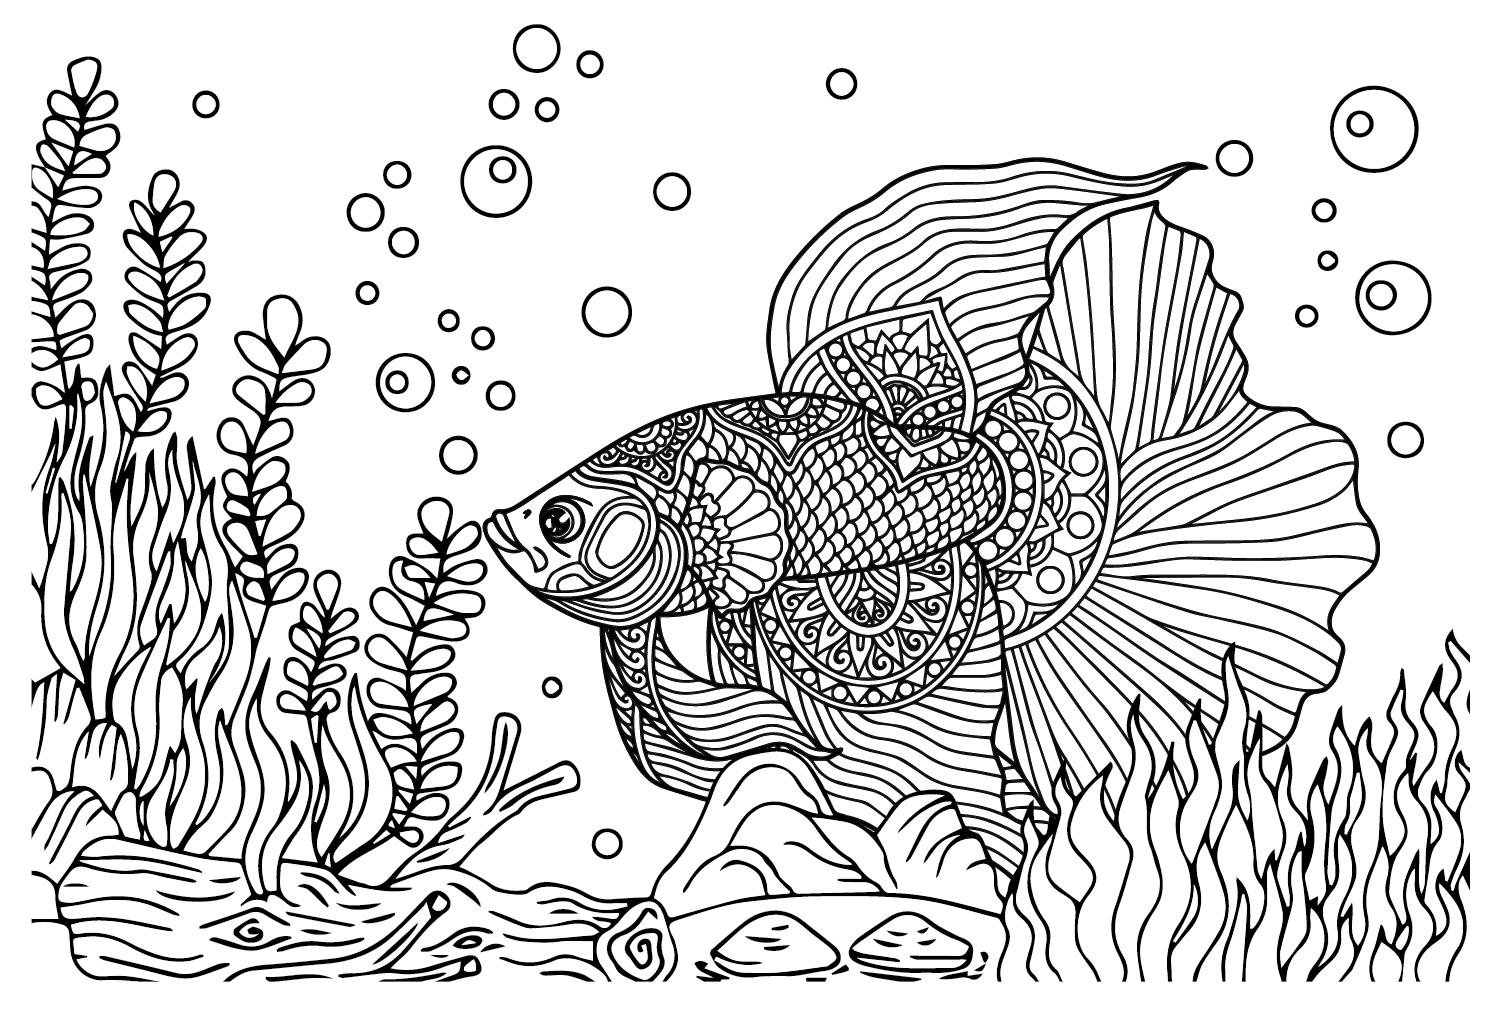 Betta Fish to Color Coloring Page - Free Printable Coloring Pages